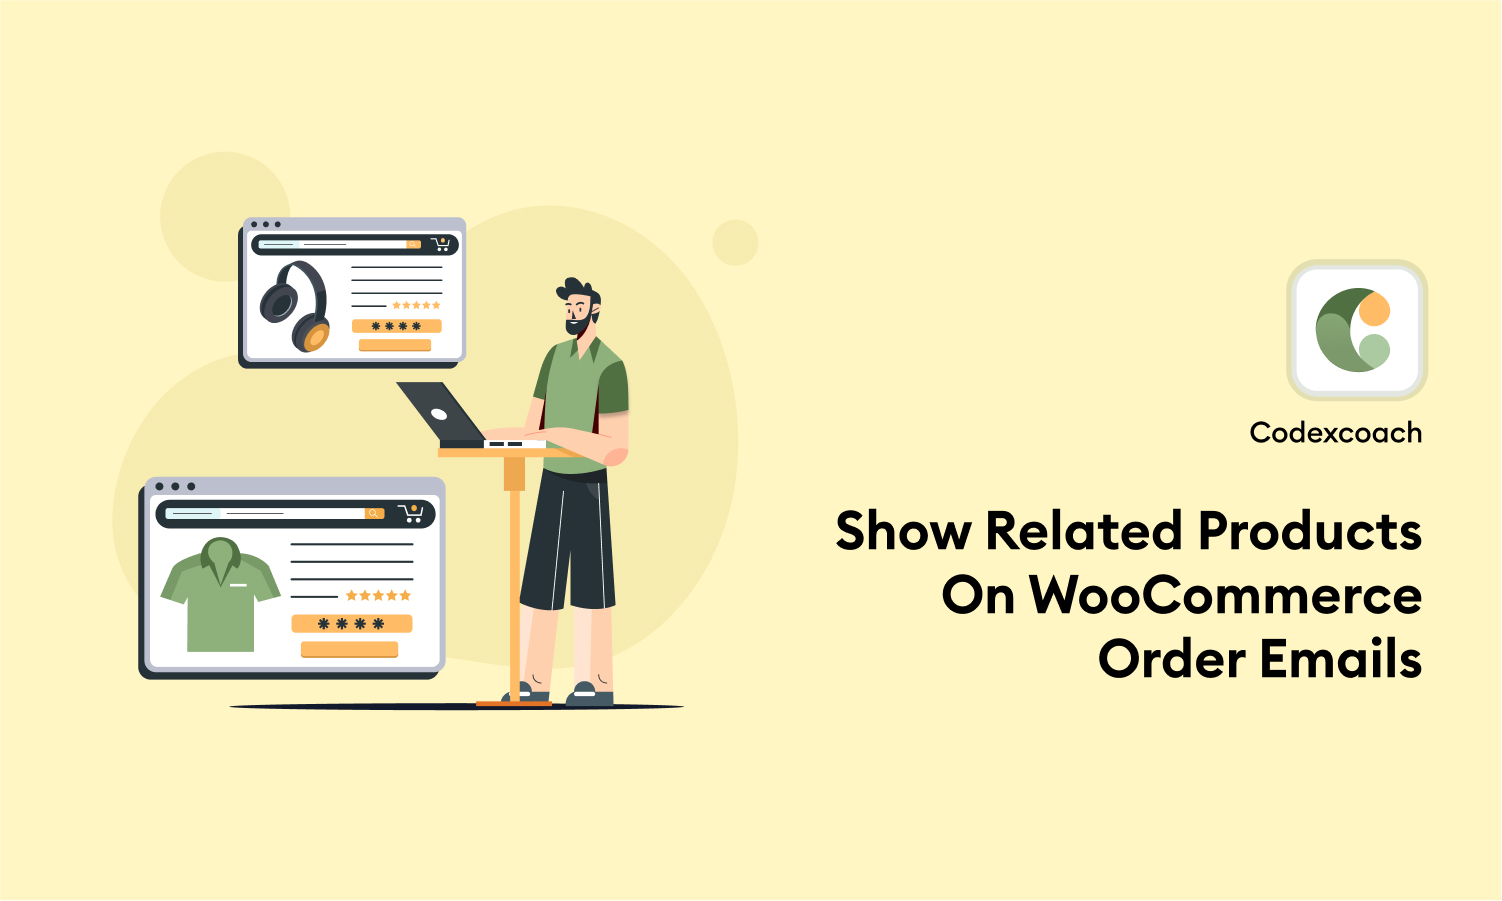 Show Related Products On WooCommerce Order Emails